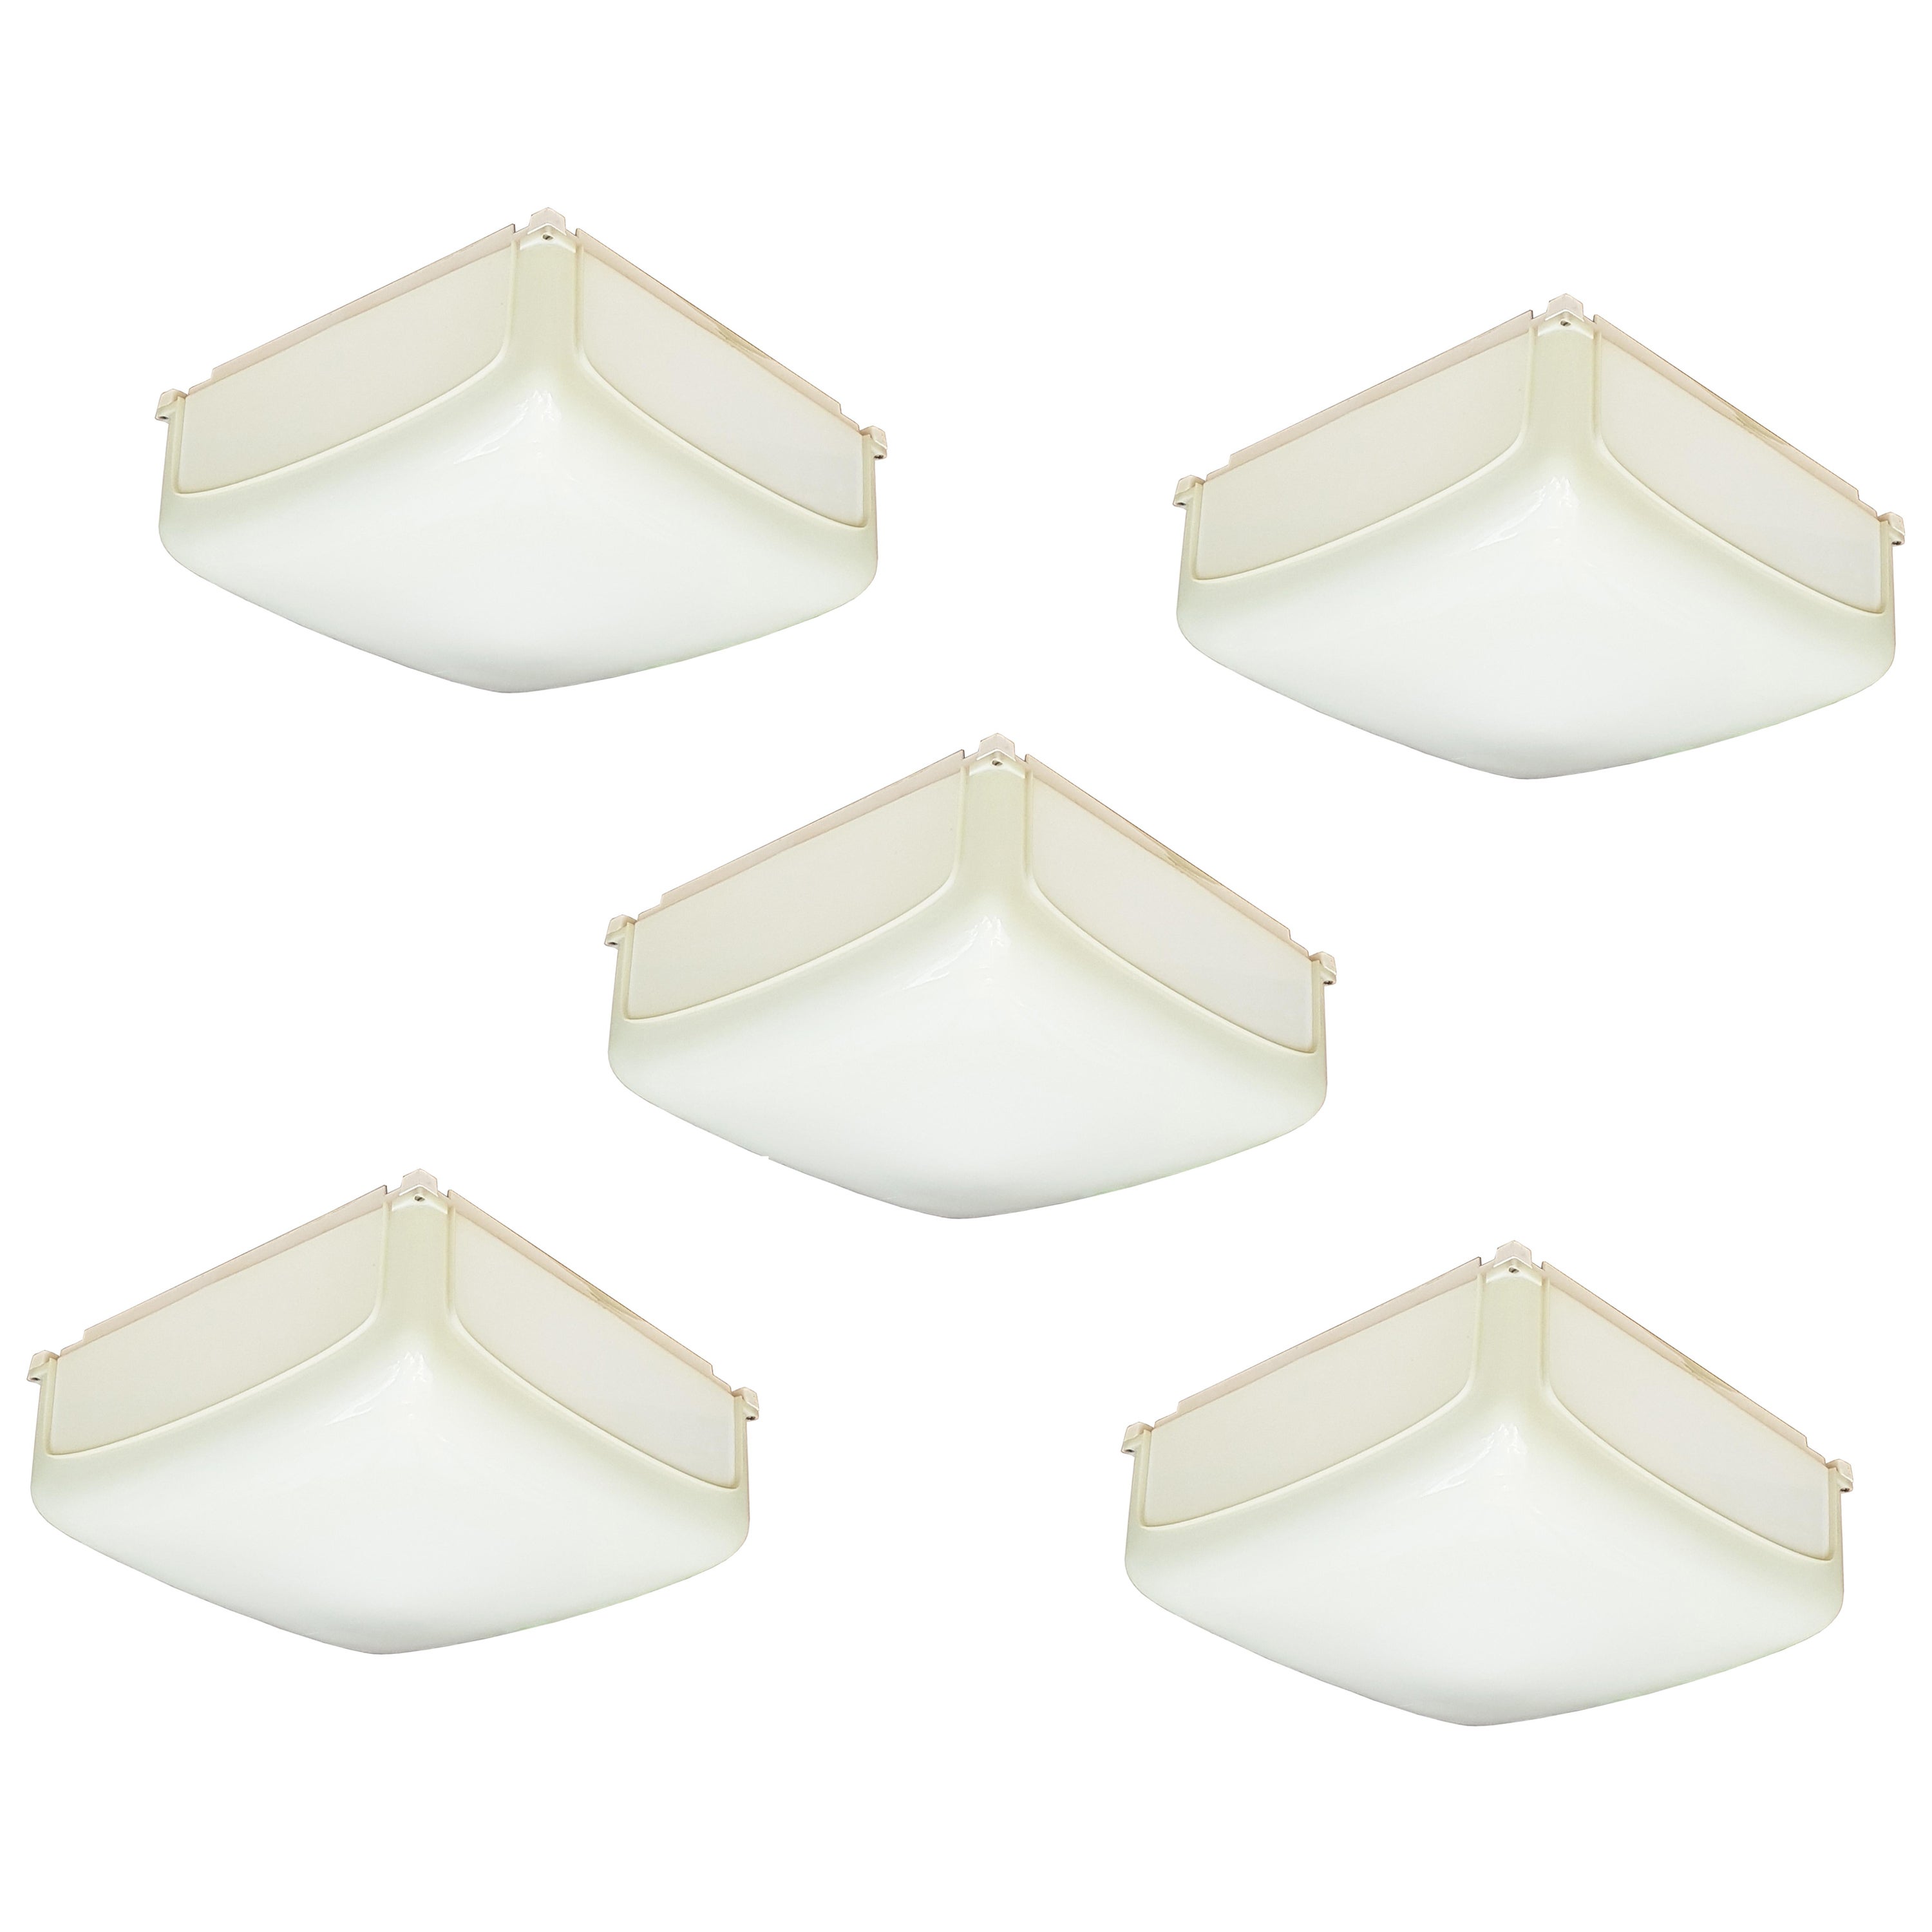 5 Ivory Plastic 1969 Cnosso Wall or Ceiling Lamps by Mangiarotti for Artemide For Sale